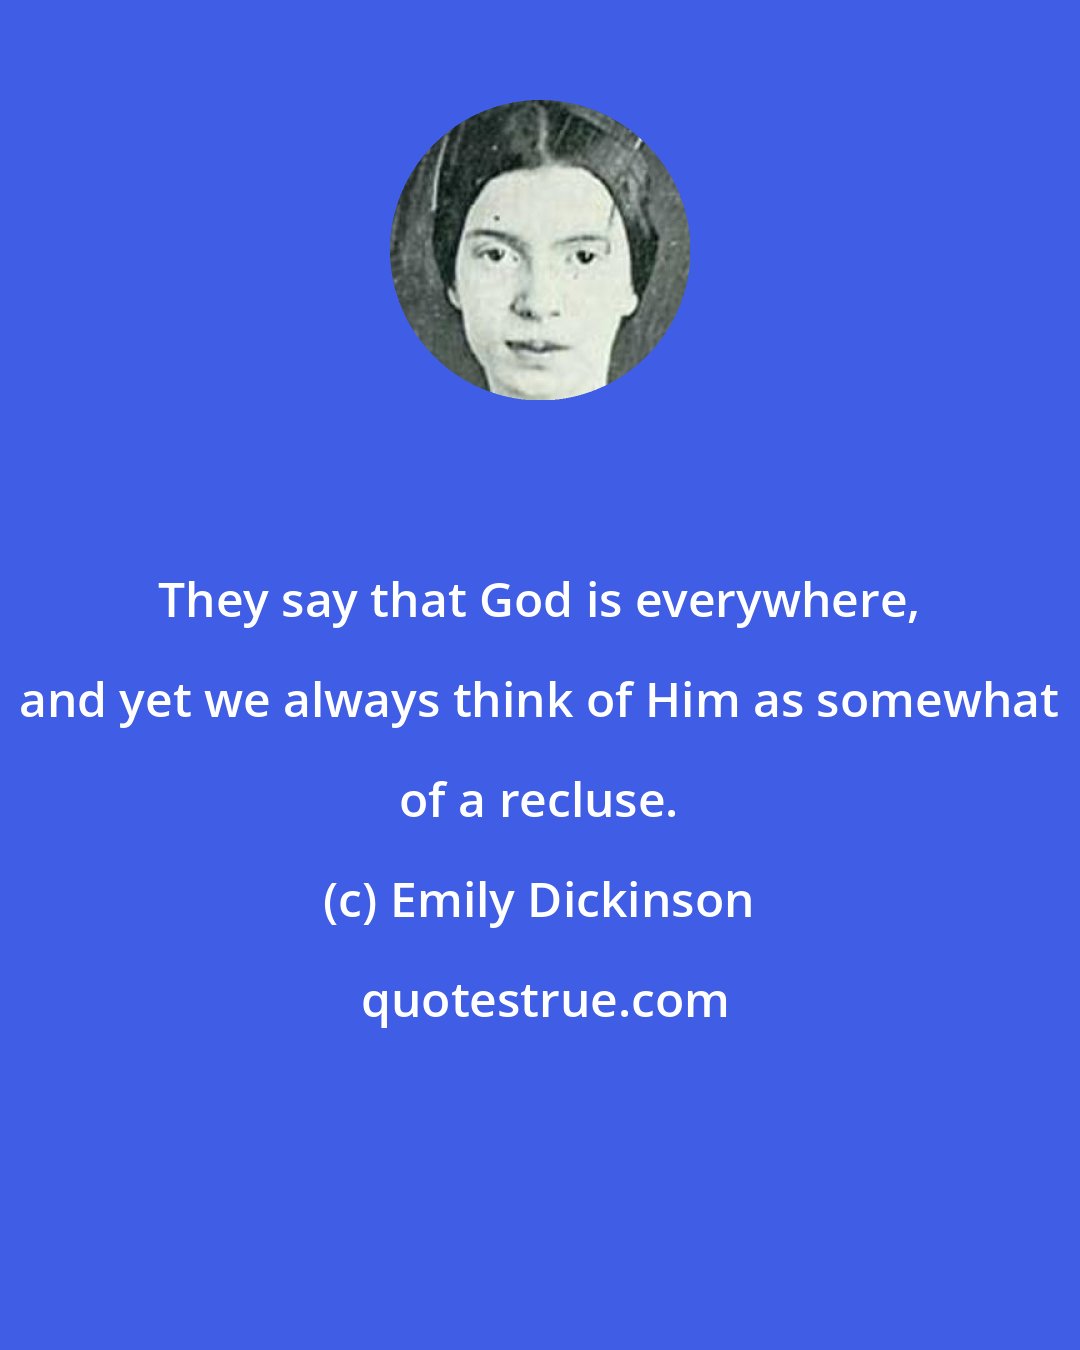 Emily Dickinson: They say that God is everywhere, and yet we always think of Him as somewhat of a recluse.